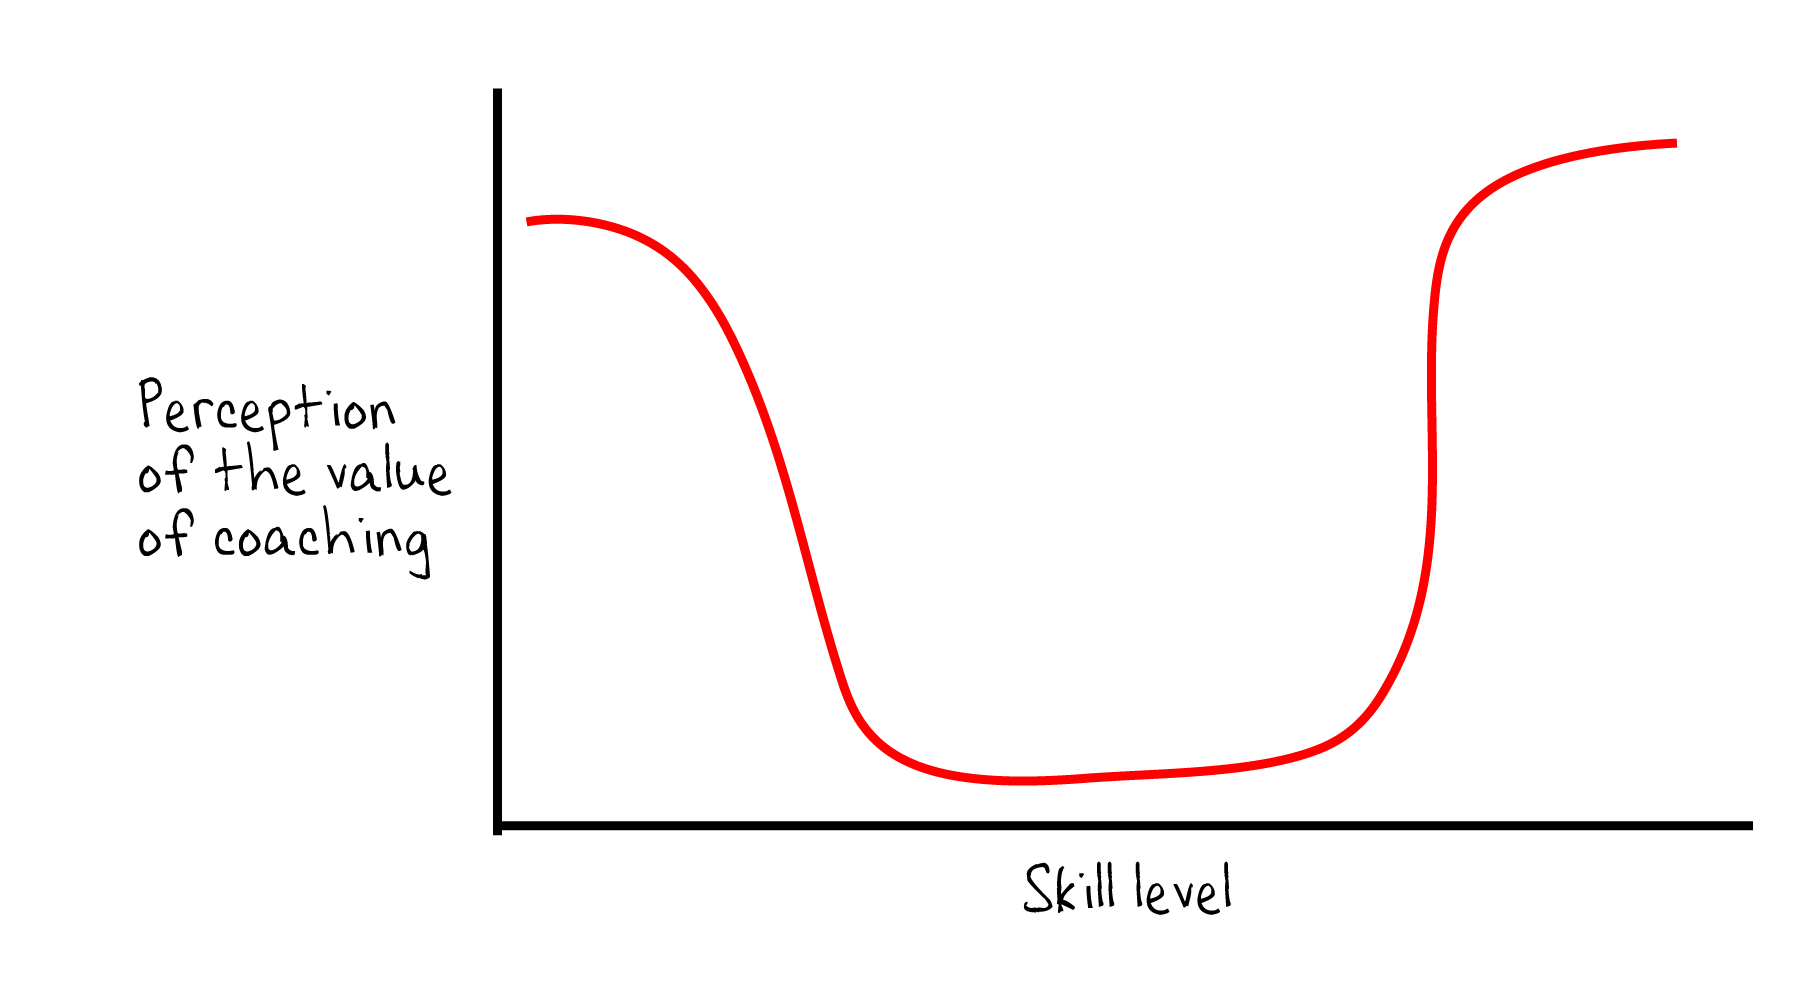 Perceived coaching need curve